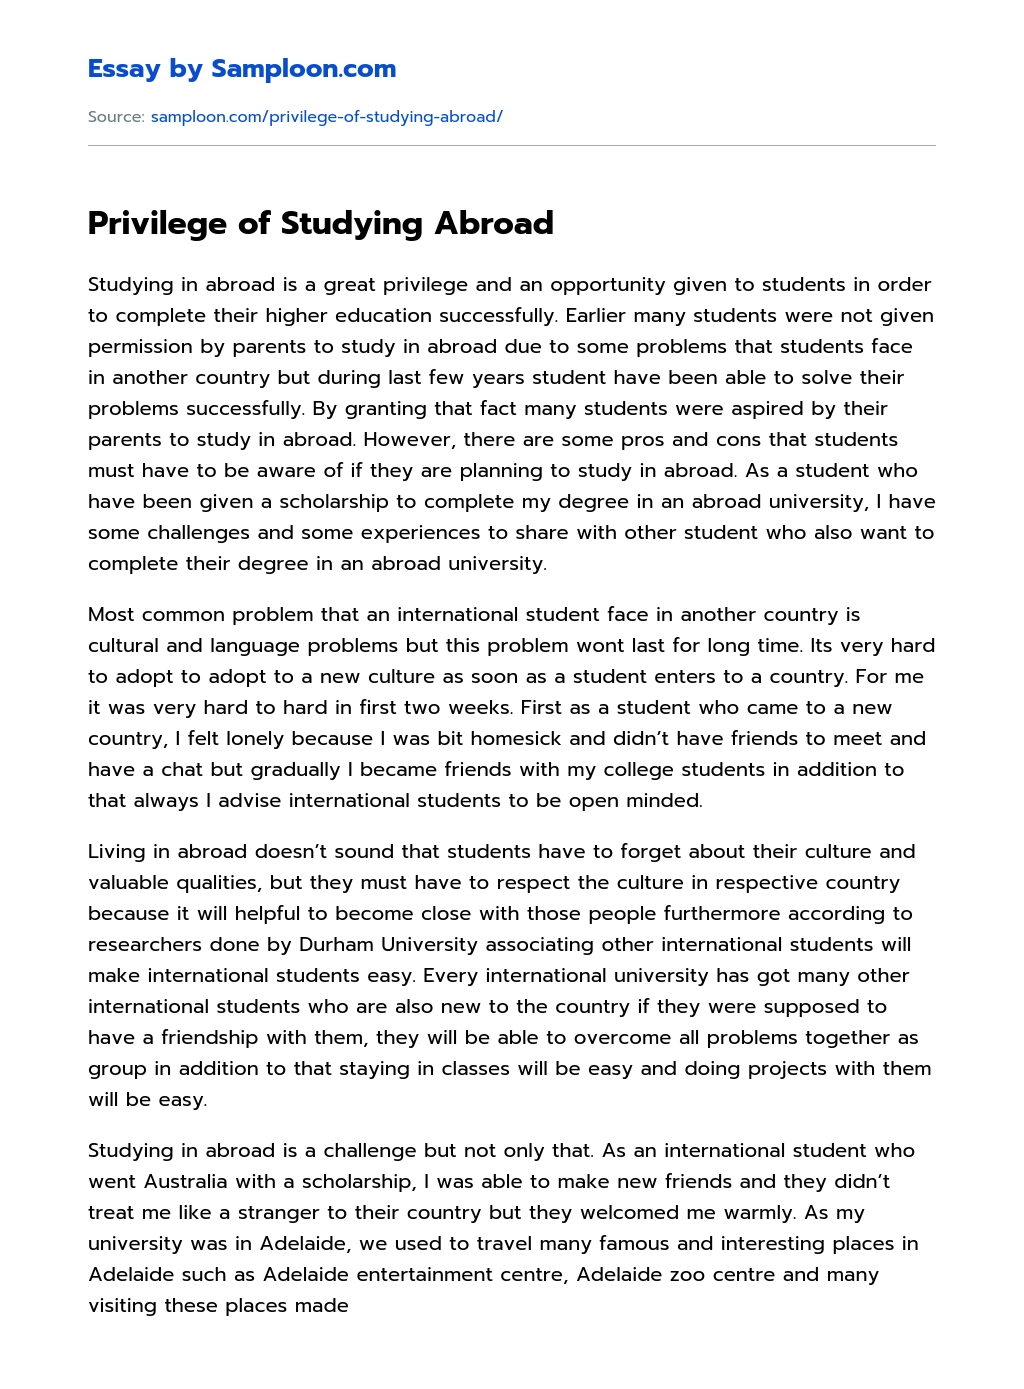 Privilege of Studying Abroad essay